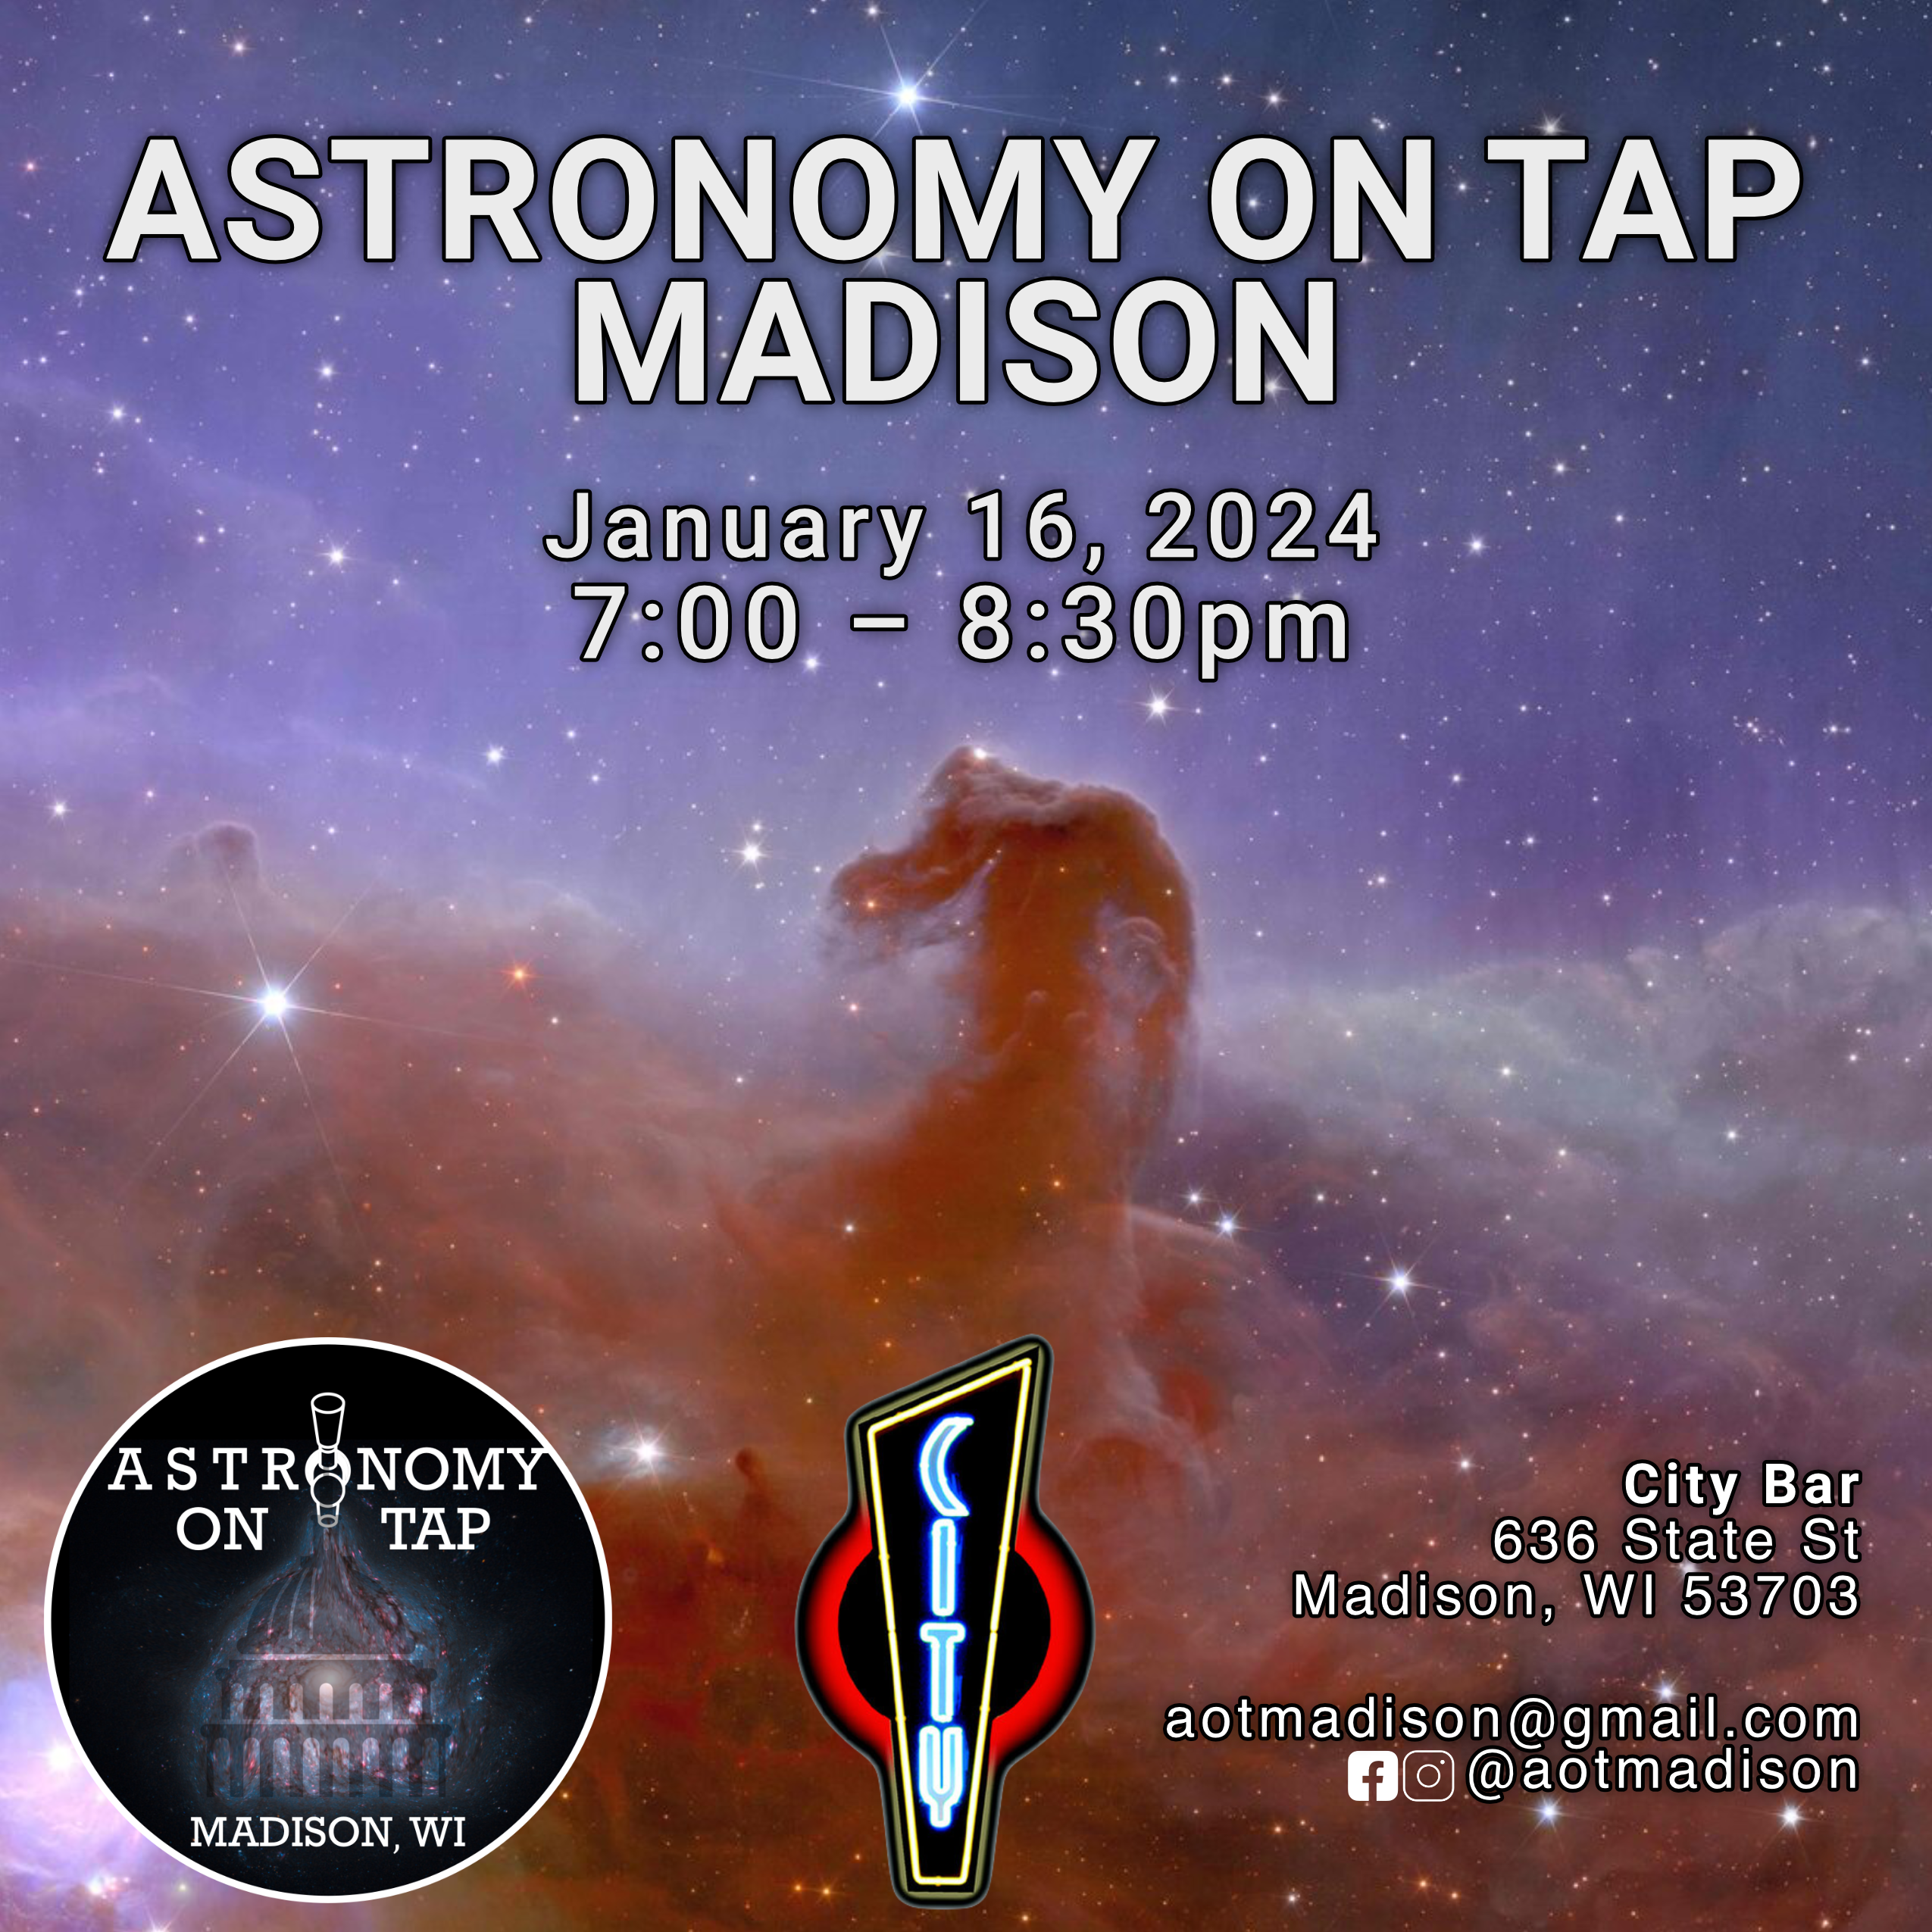 Astronomy on Tap Madison flyer for January 16, 2024 7-8:30pm event at City Bar on State Street in Madison, WI.